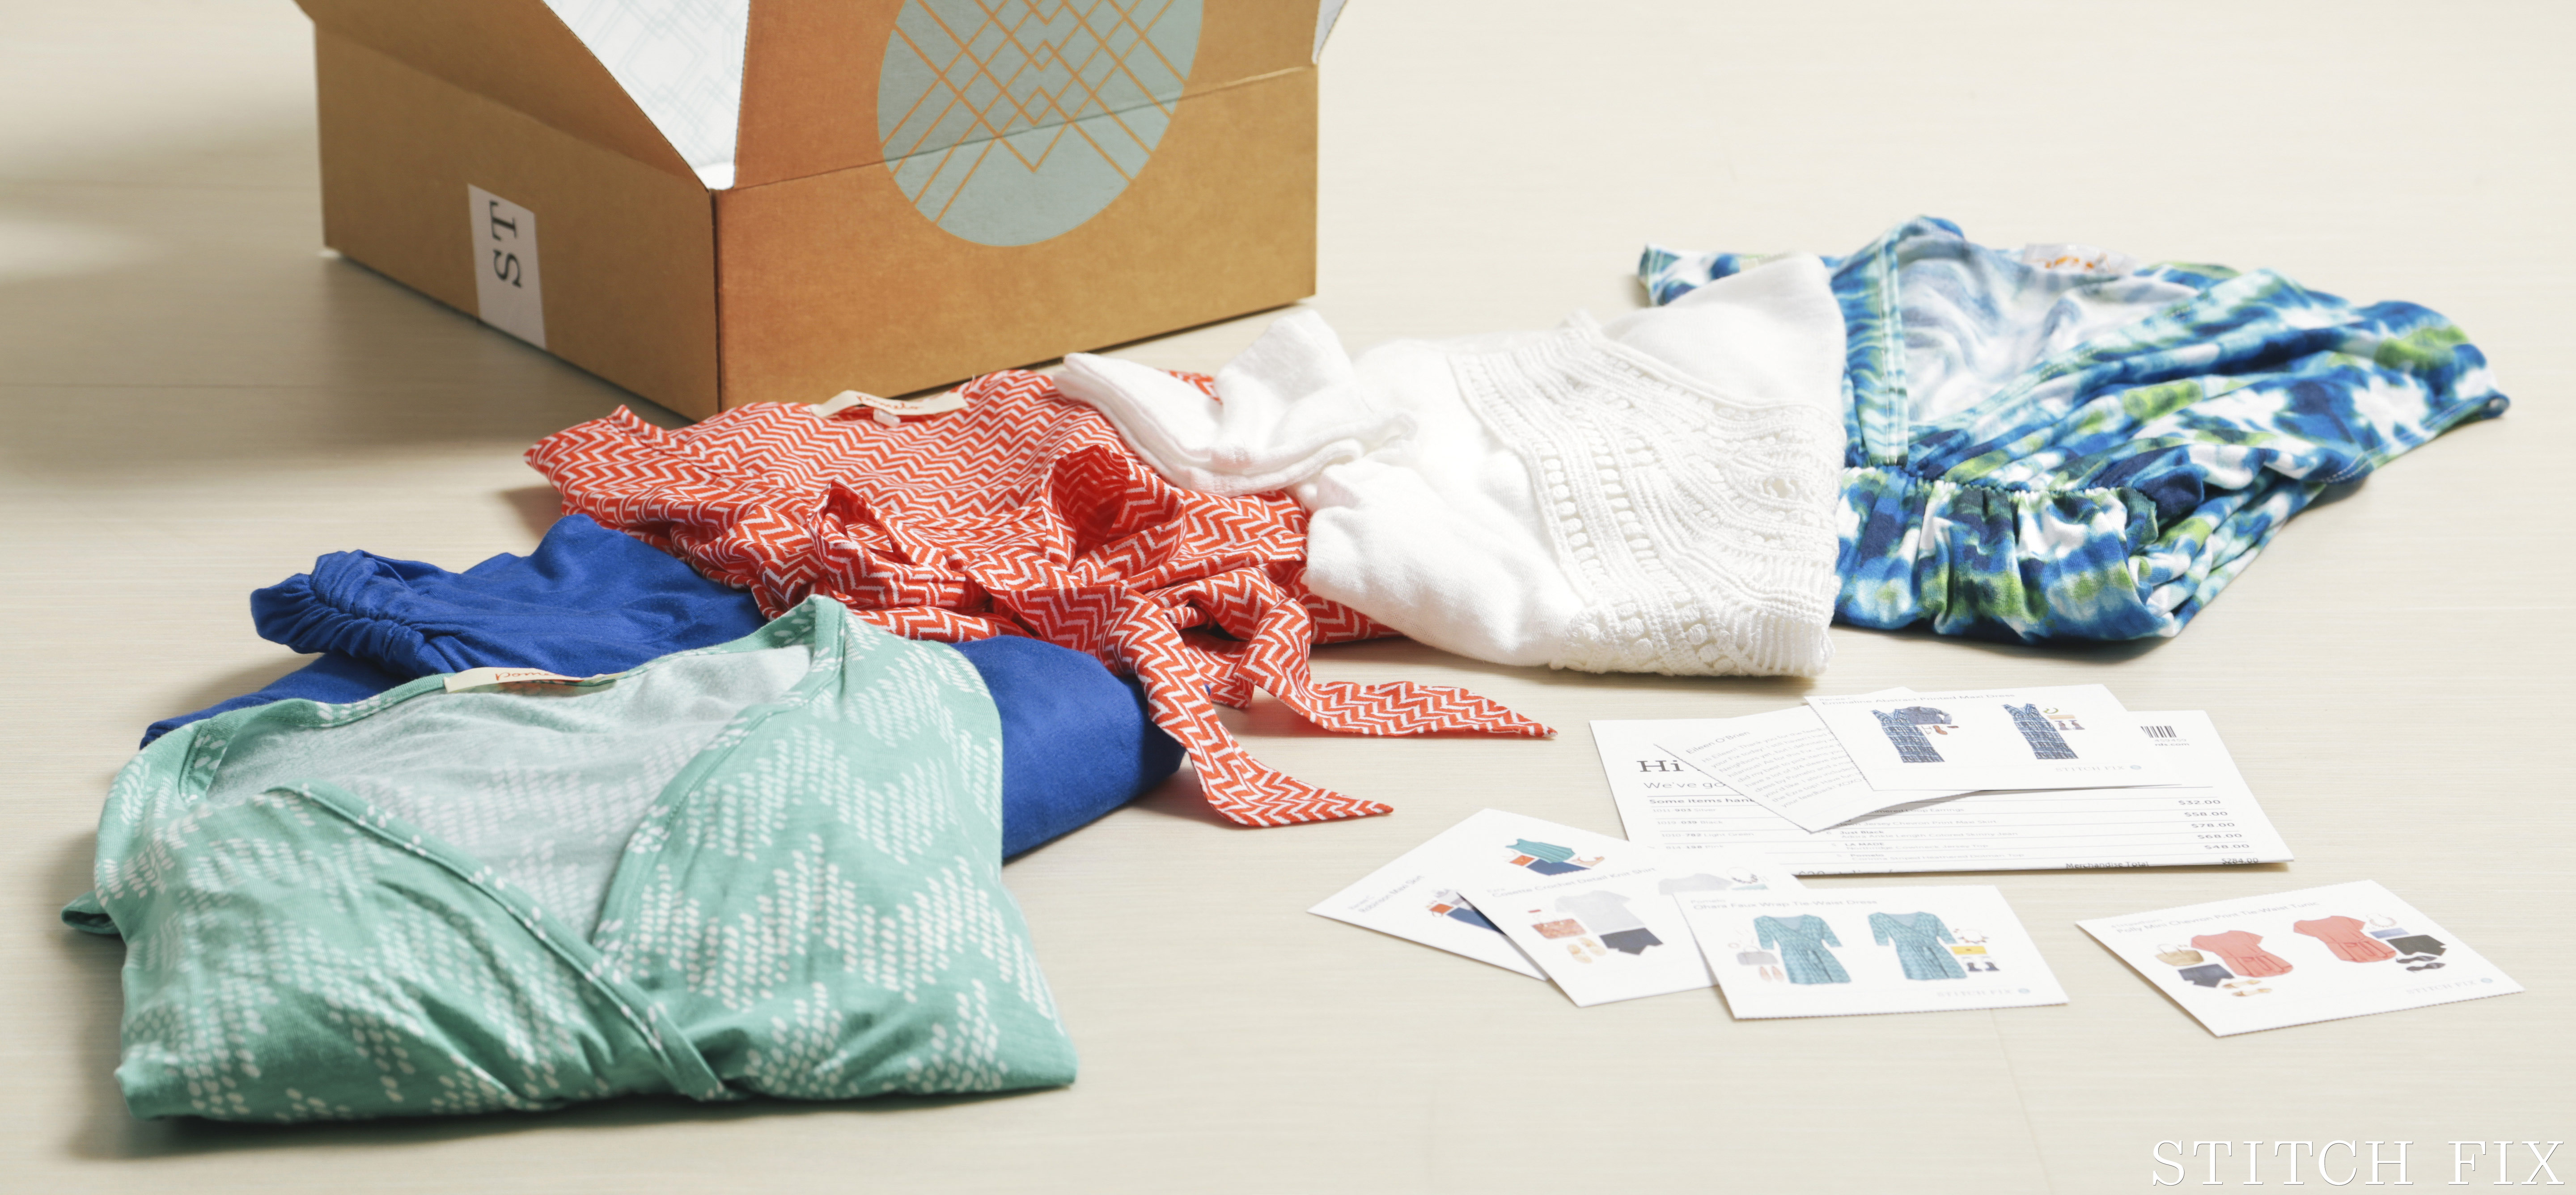 Here are 5 reasons to love Stitch Fix!